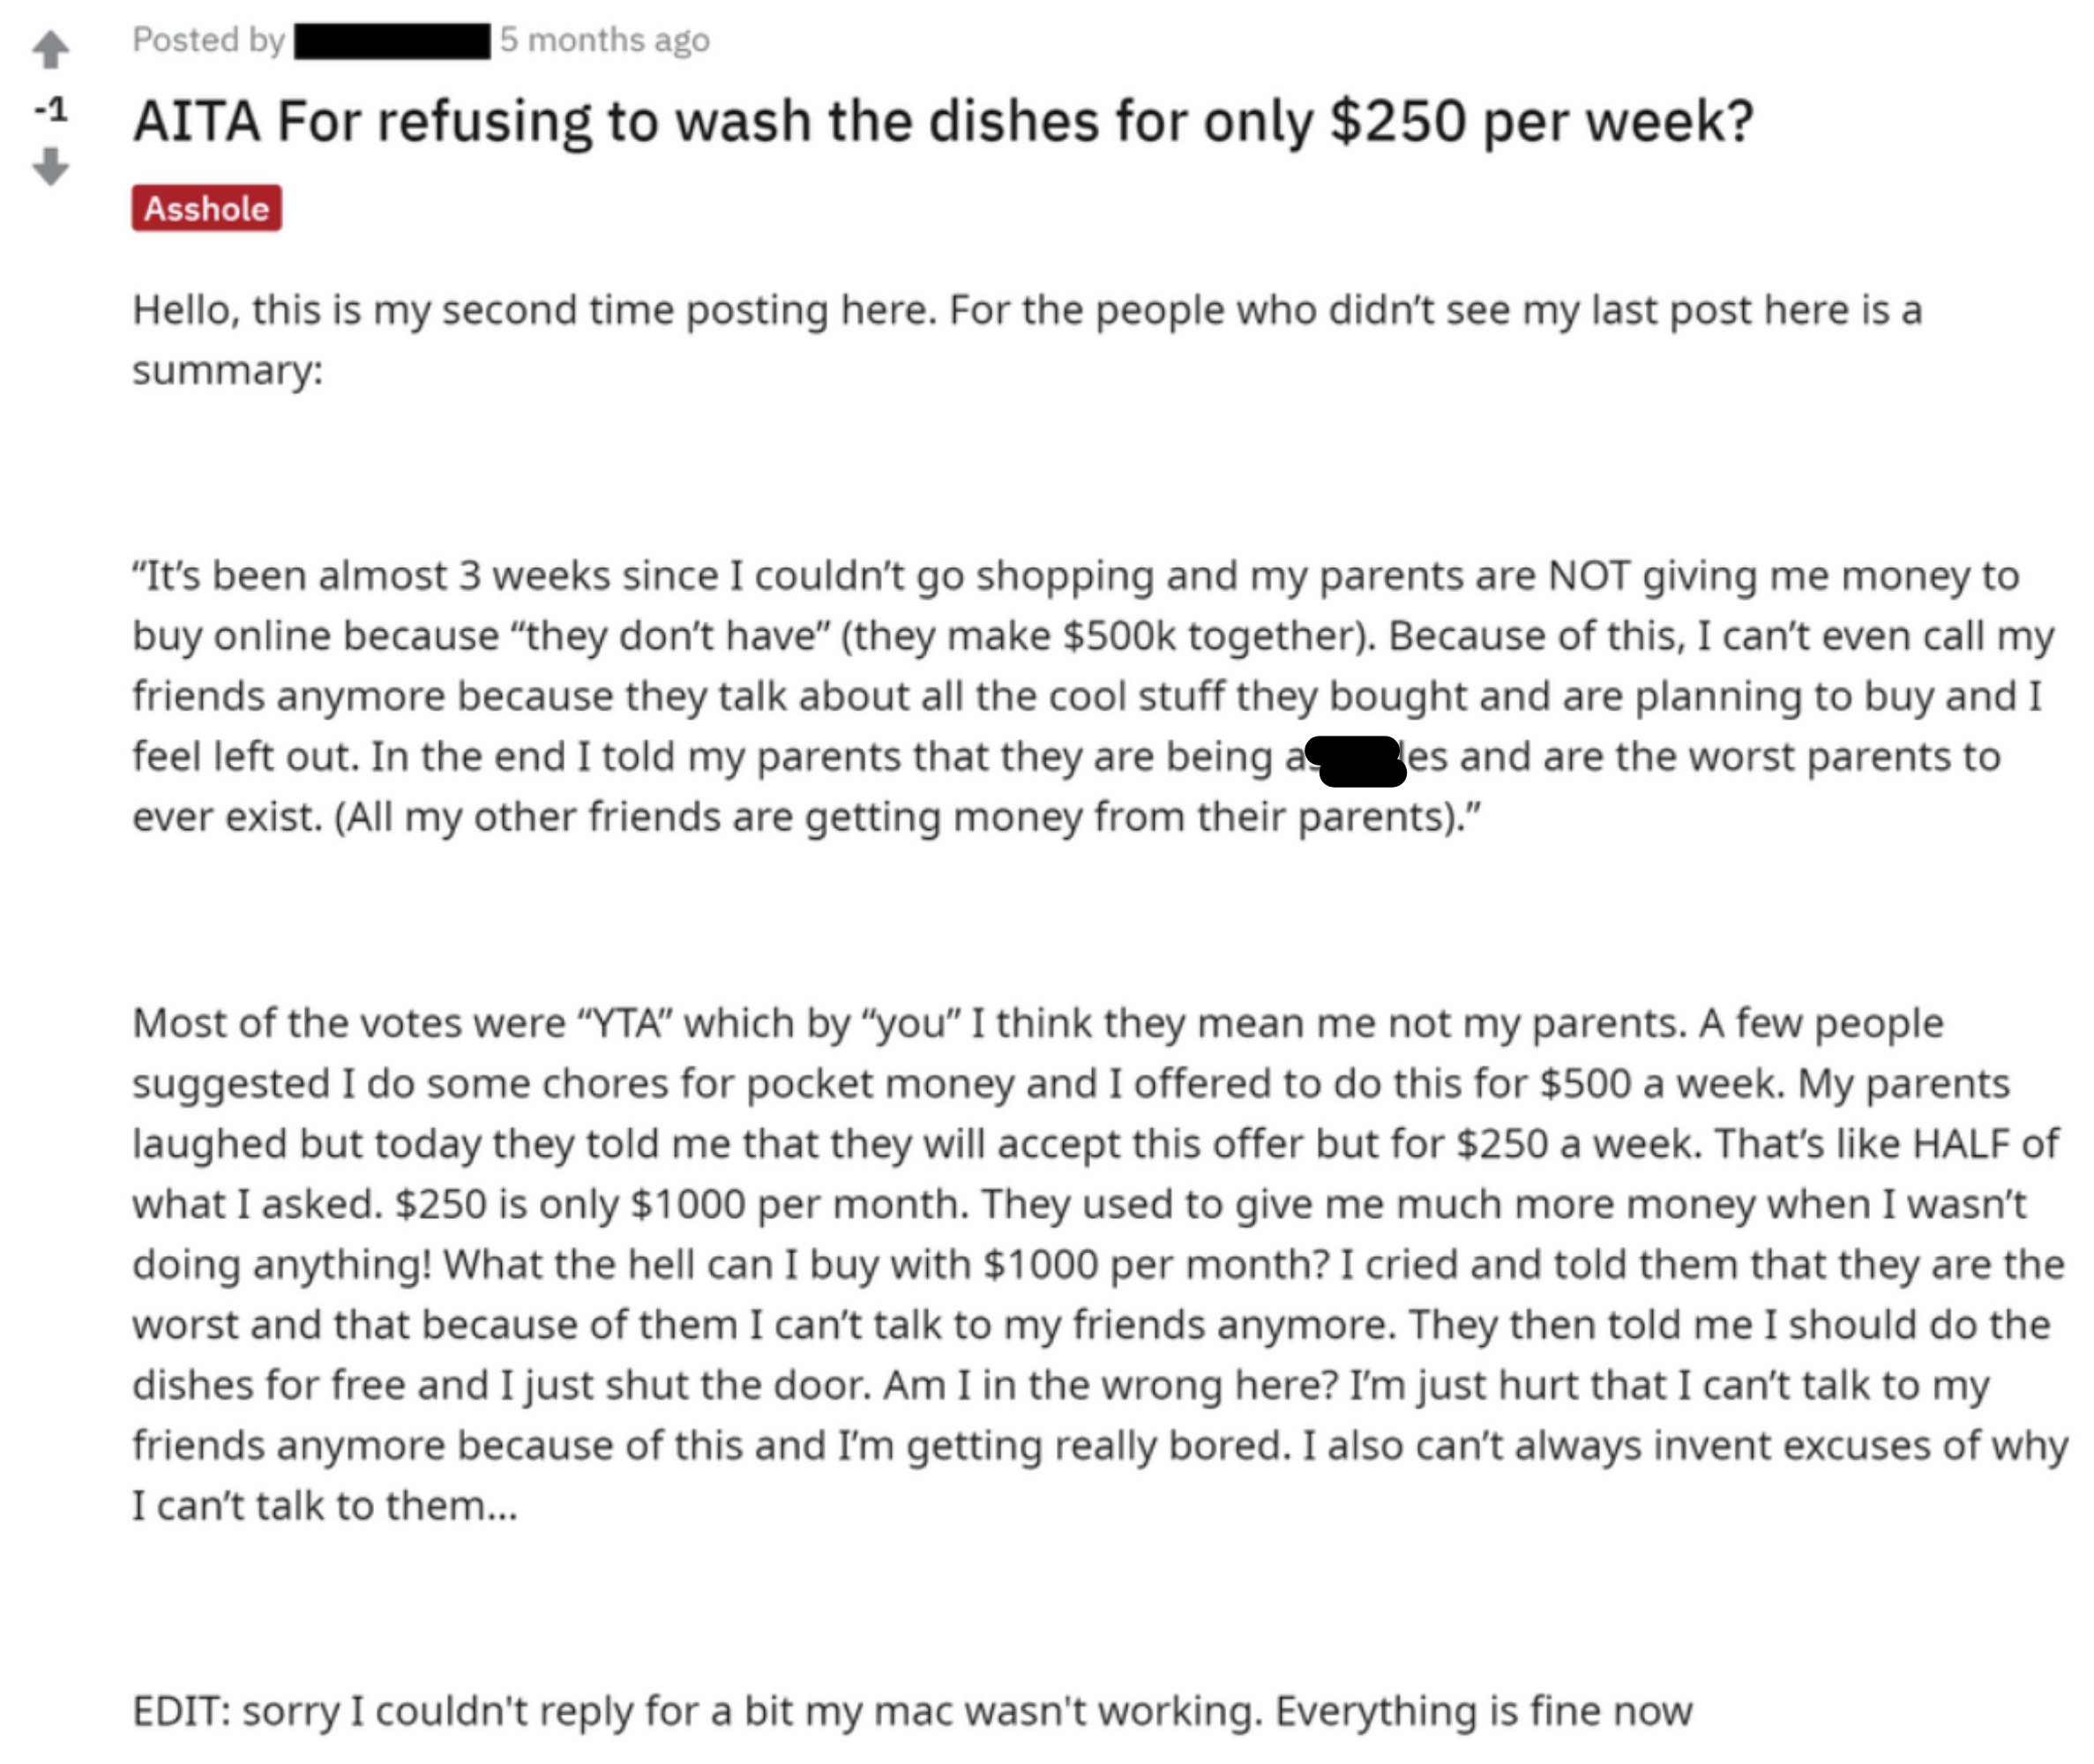 A long post in which a teen says they wanted $500 a week for doing chores, their parents offered $250, and they responded with &quot;what can I buy with $1,000 a month?&quot;